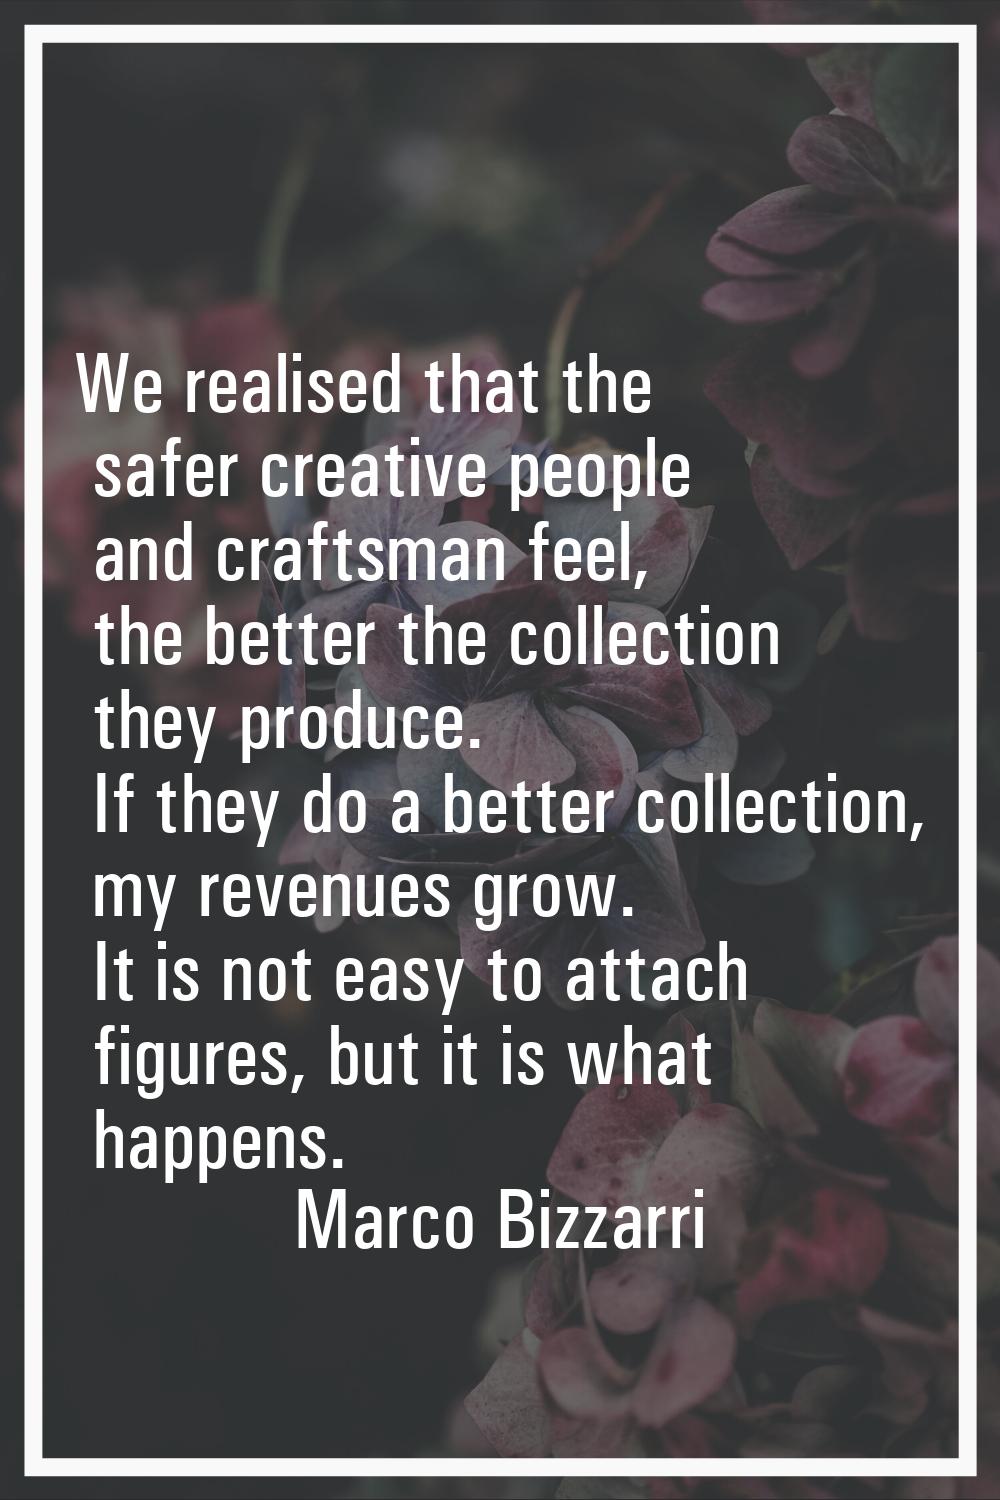 We realised that the safer creative people and craftsman feel, the better the collection they produ